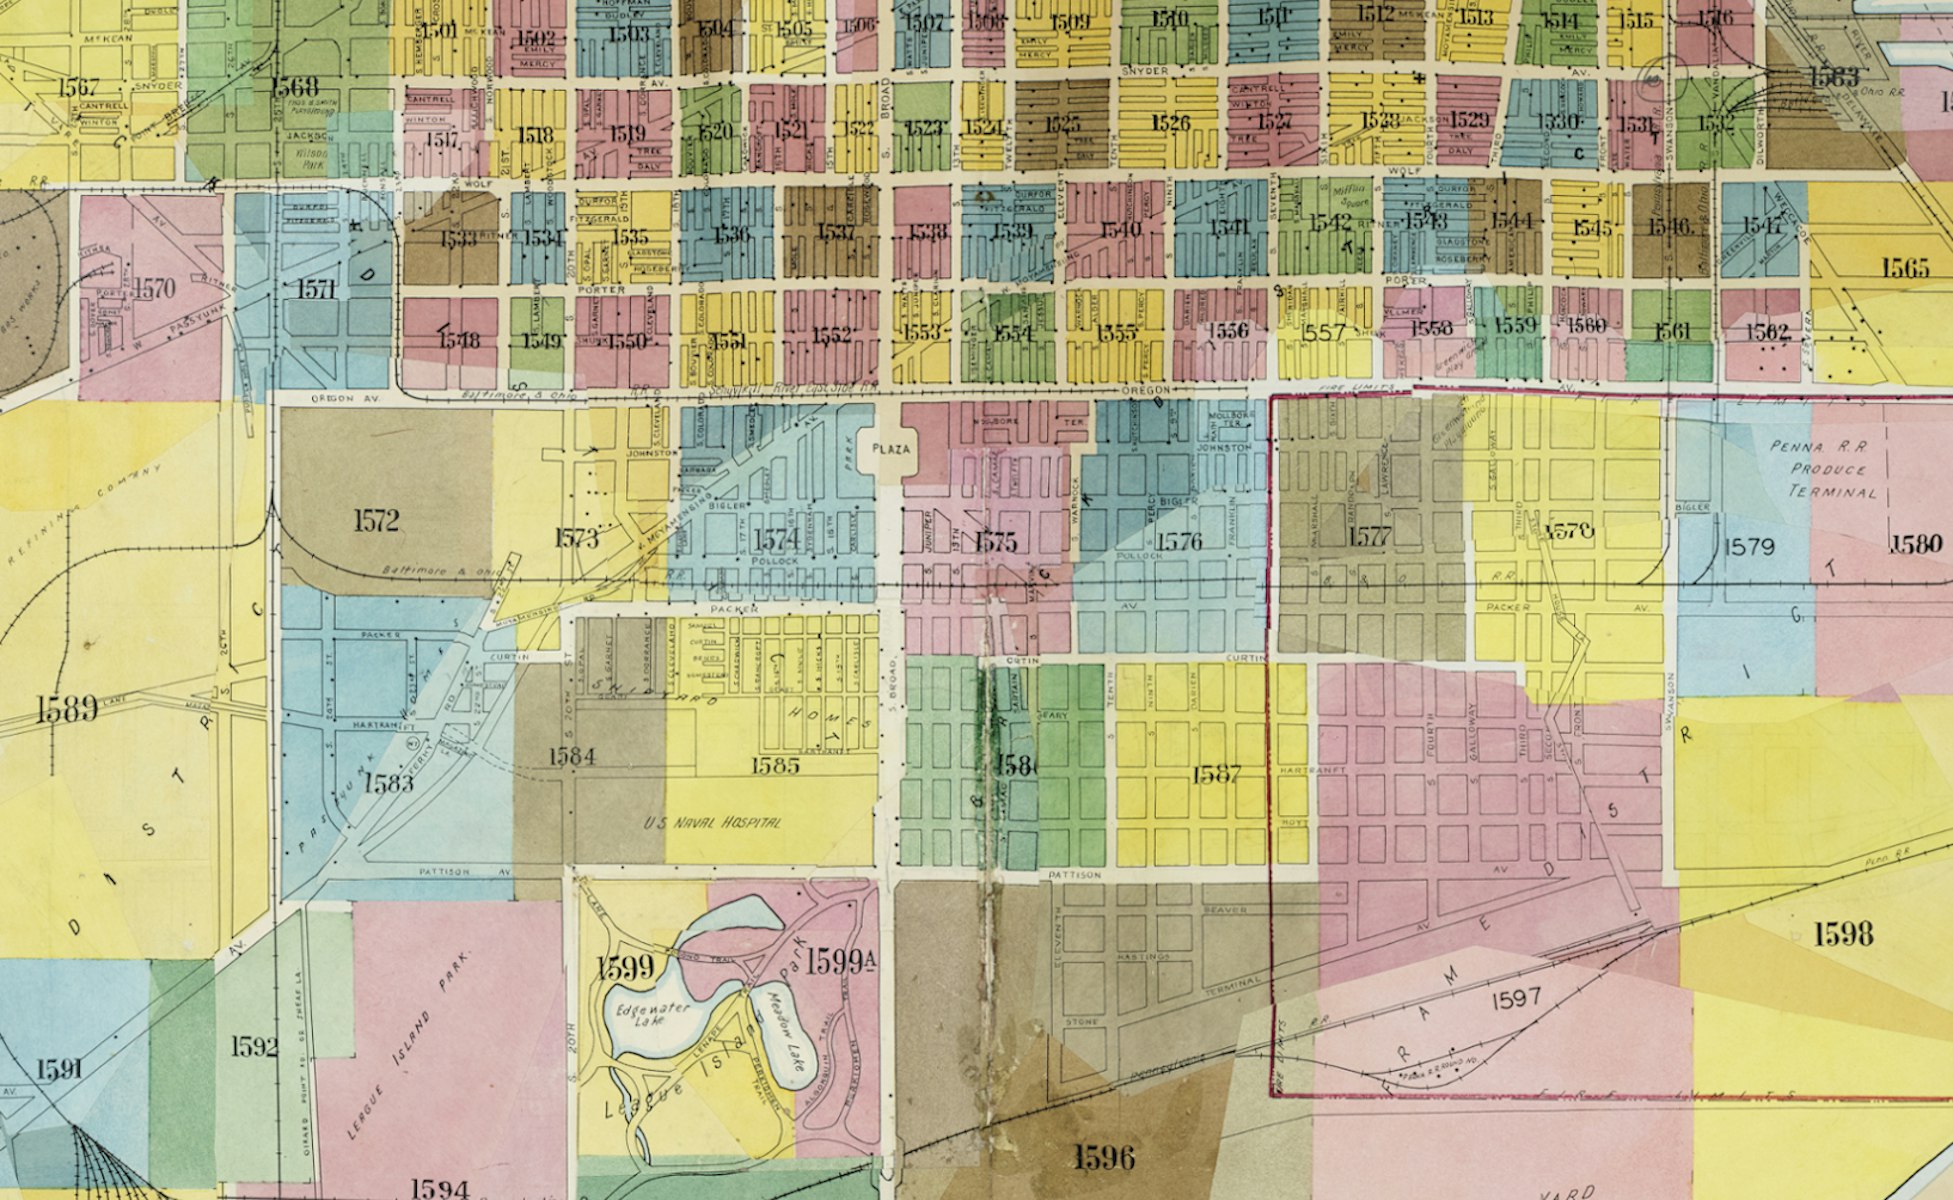 From Fire Hazards to Family Trees: The Sanborn Fire Insurance Maps